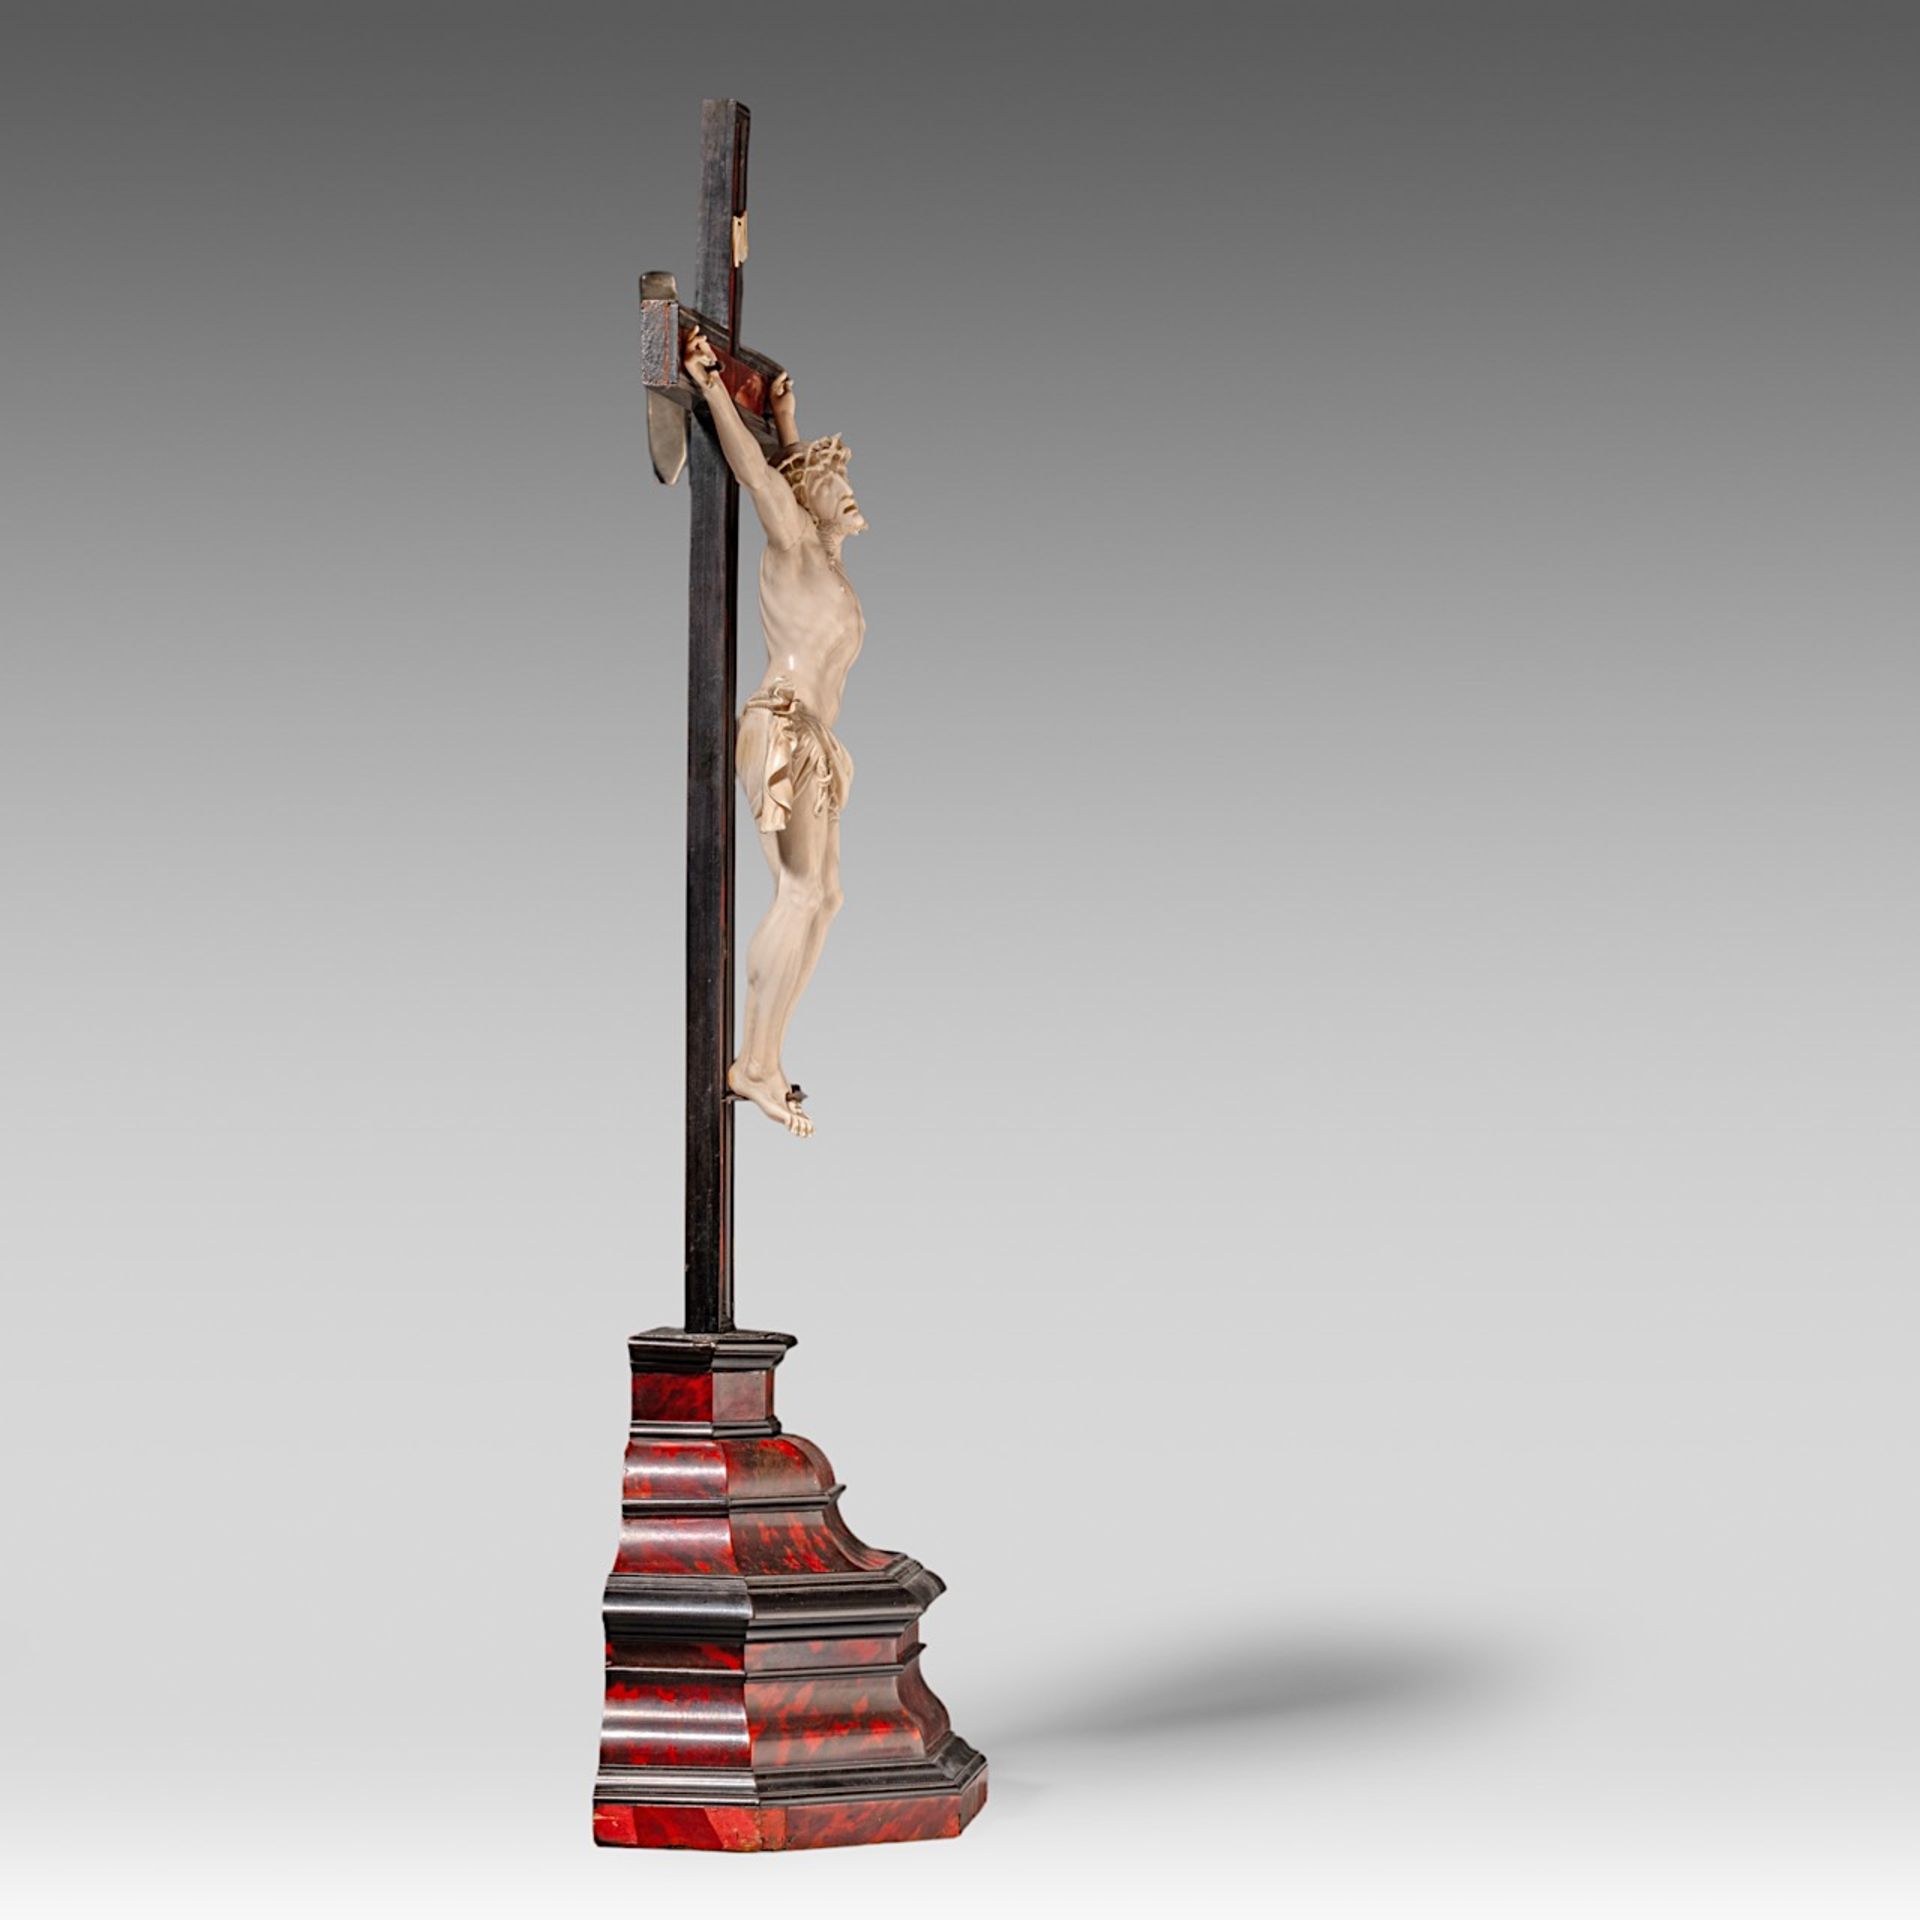 A 19th-century ivory corpus Christi, H corpus 35 cm - total H 76 cm - total weight 2189 g (+) - Image 5 of 5